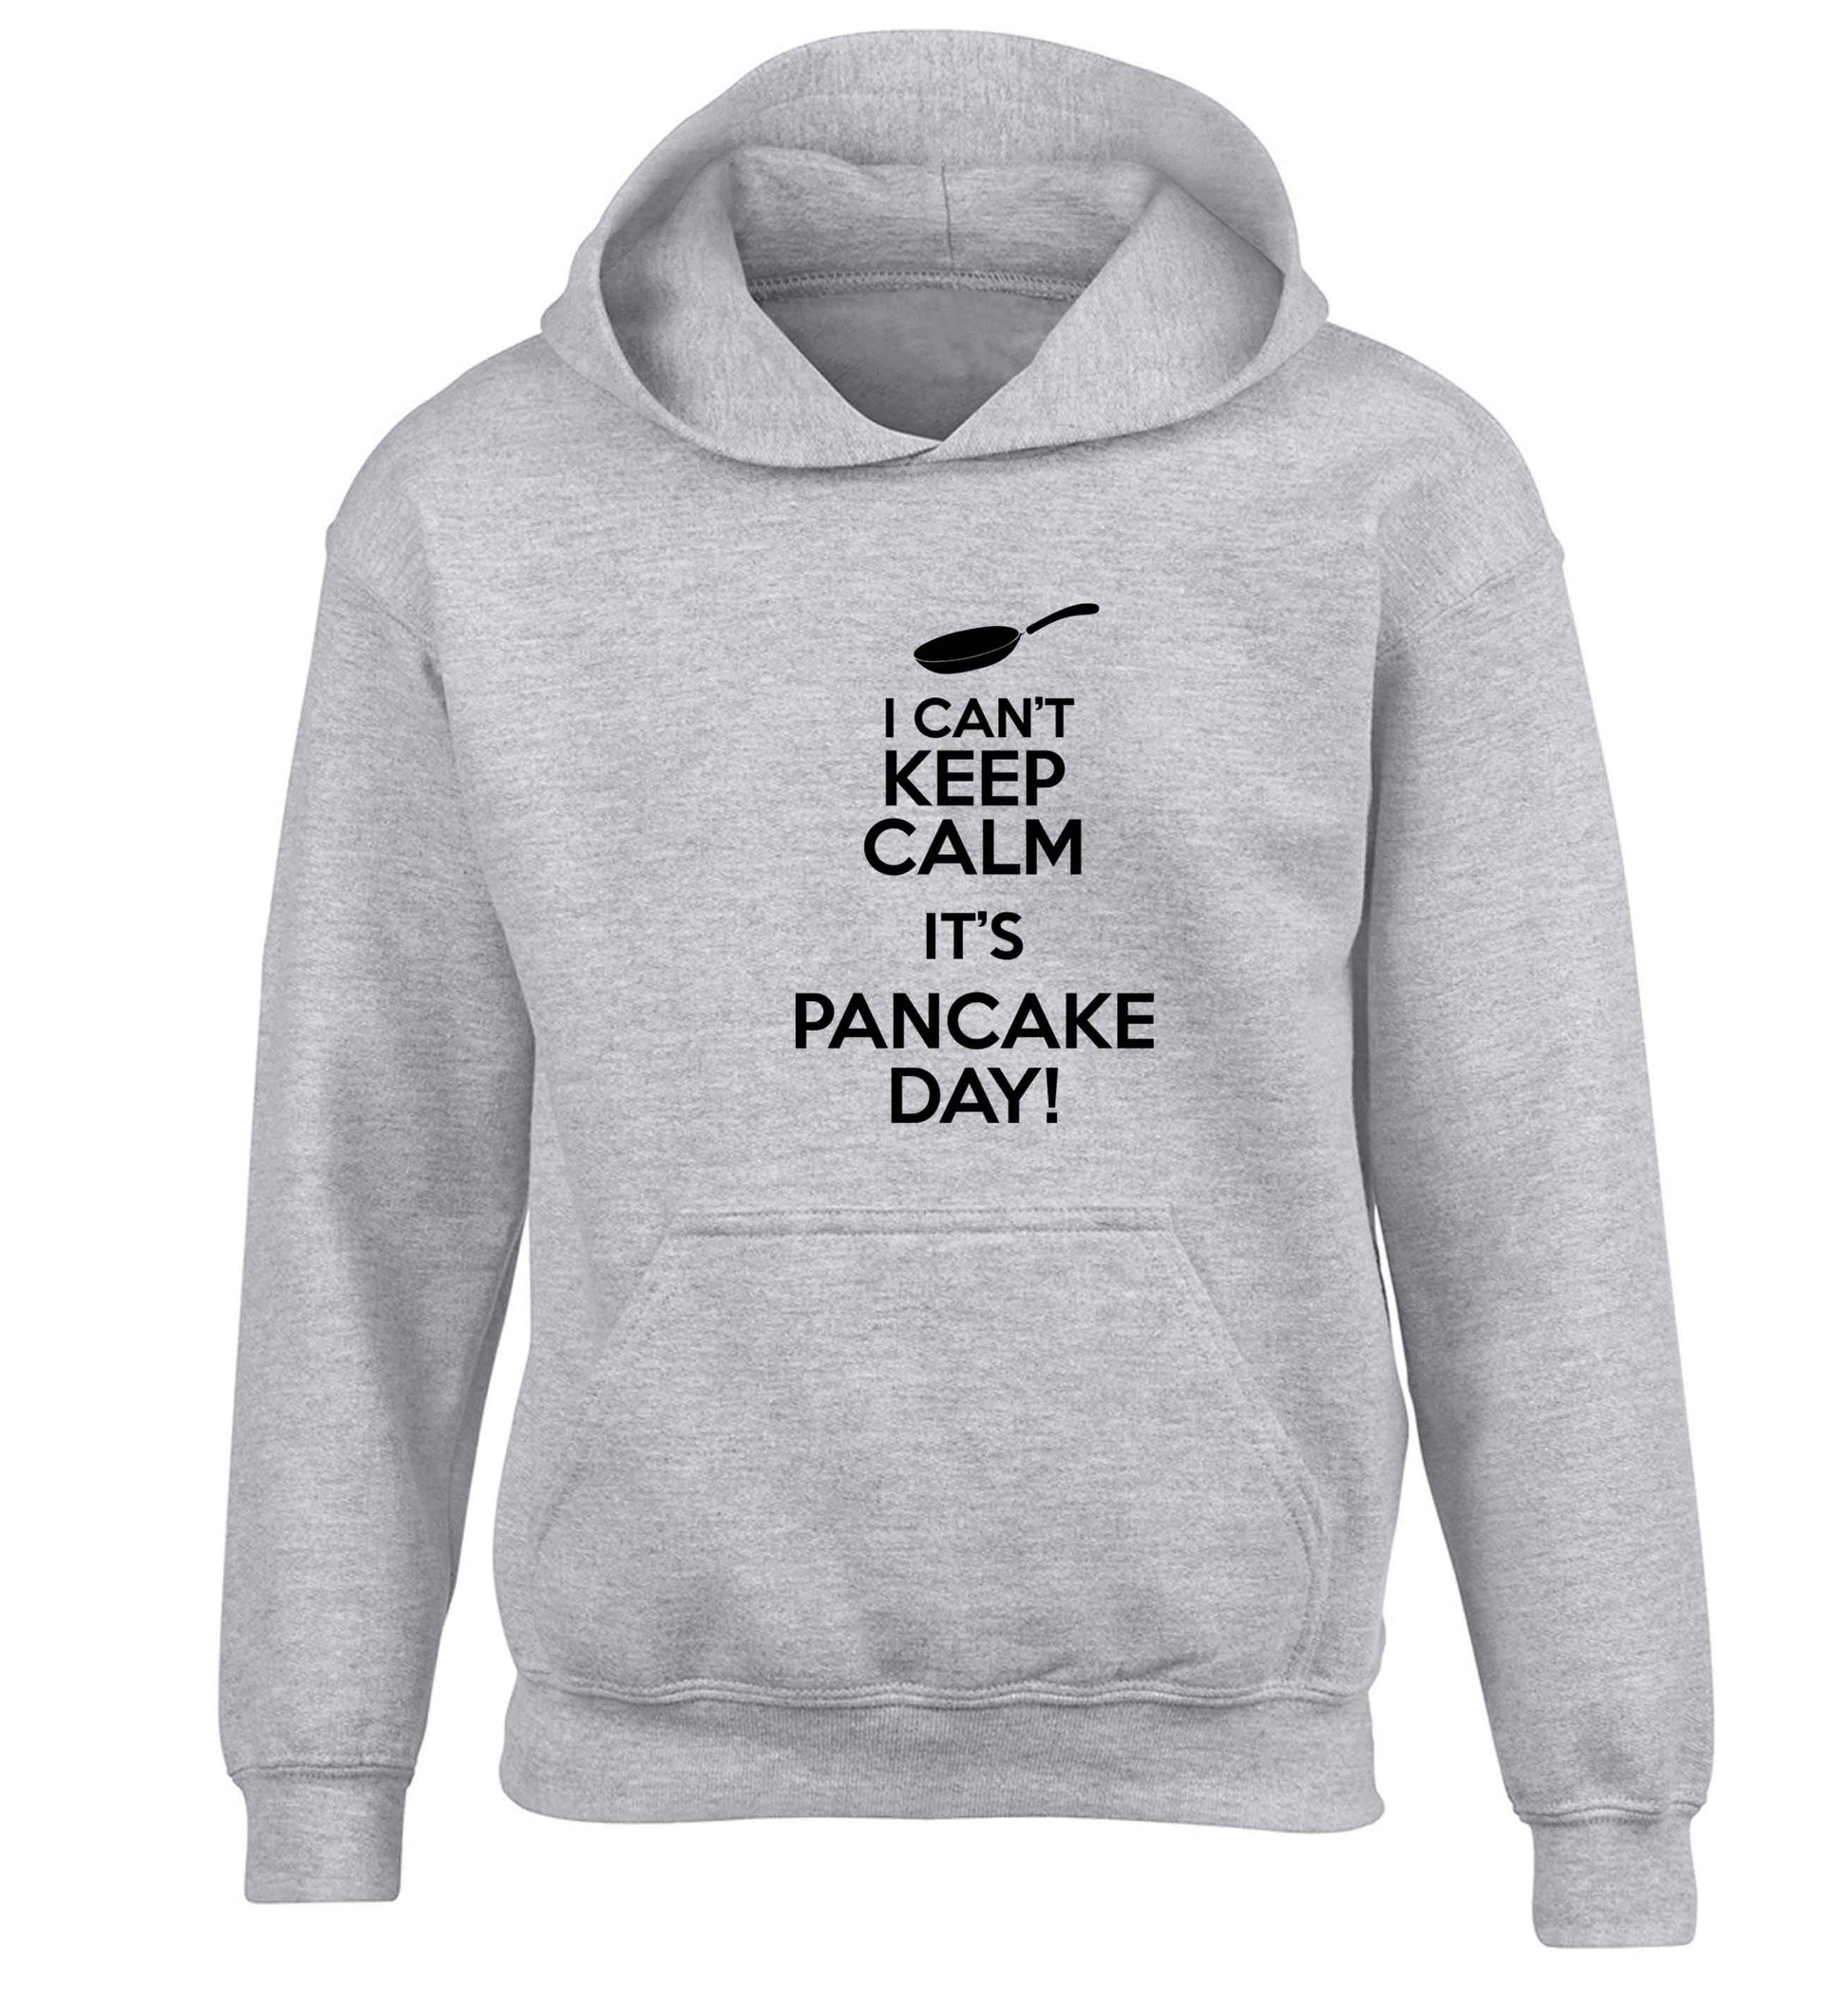 I can't keep calm it's pancake day! children's grey hoodie 12-13 Years